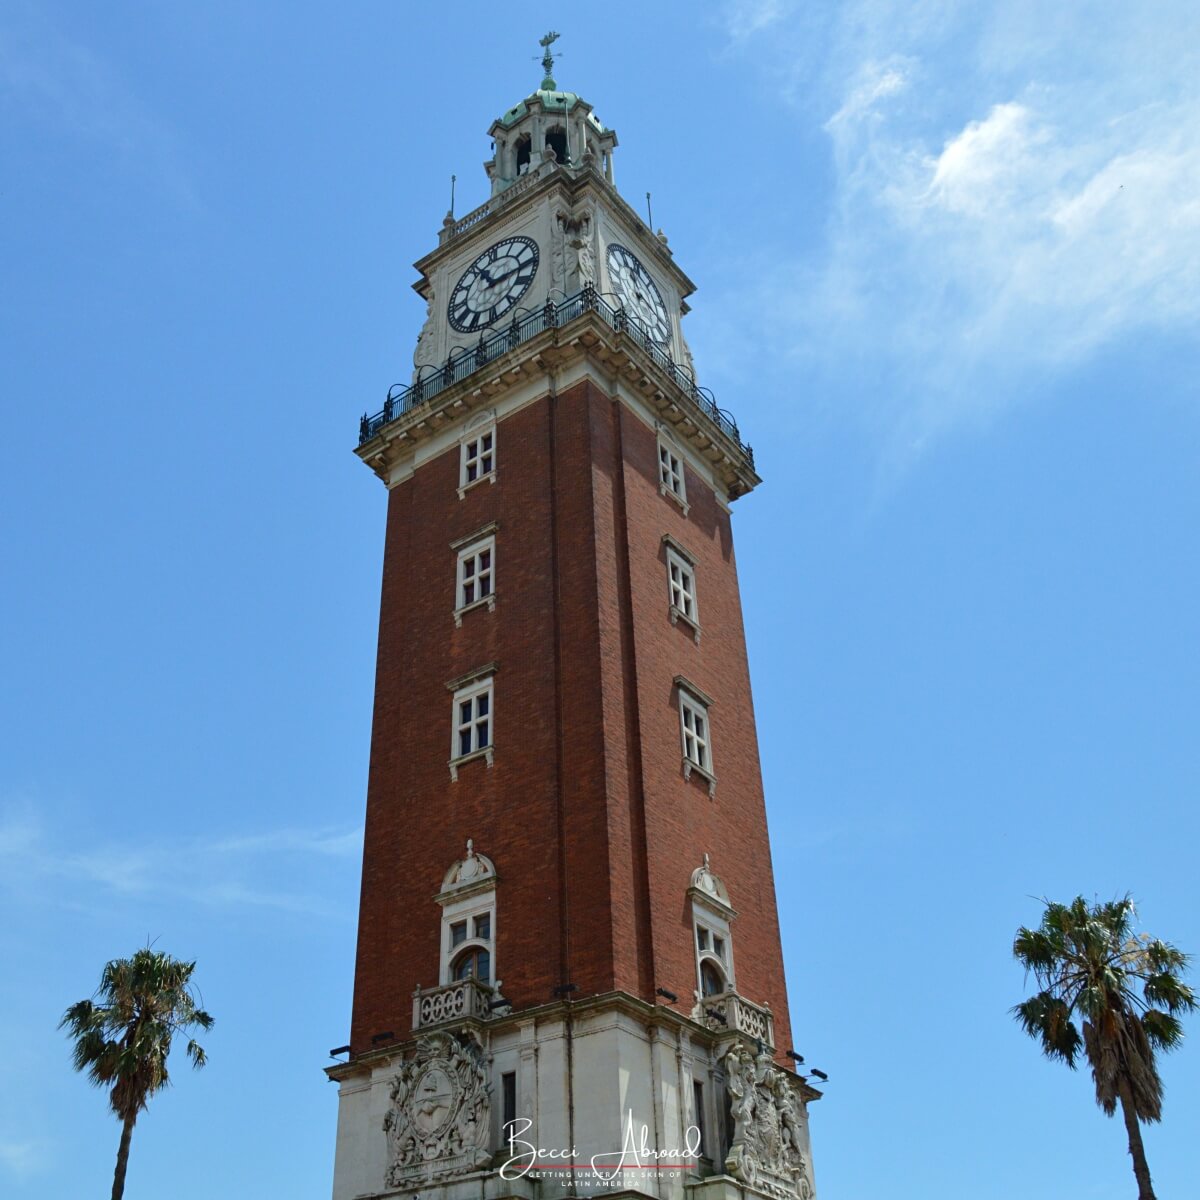 The English Tower in Buenos Aires